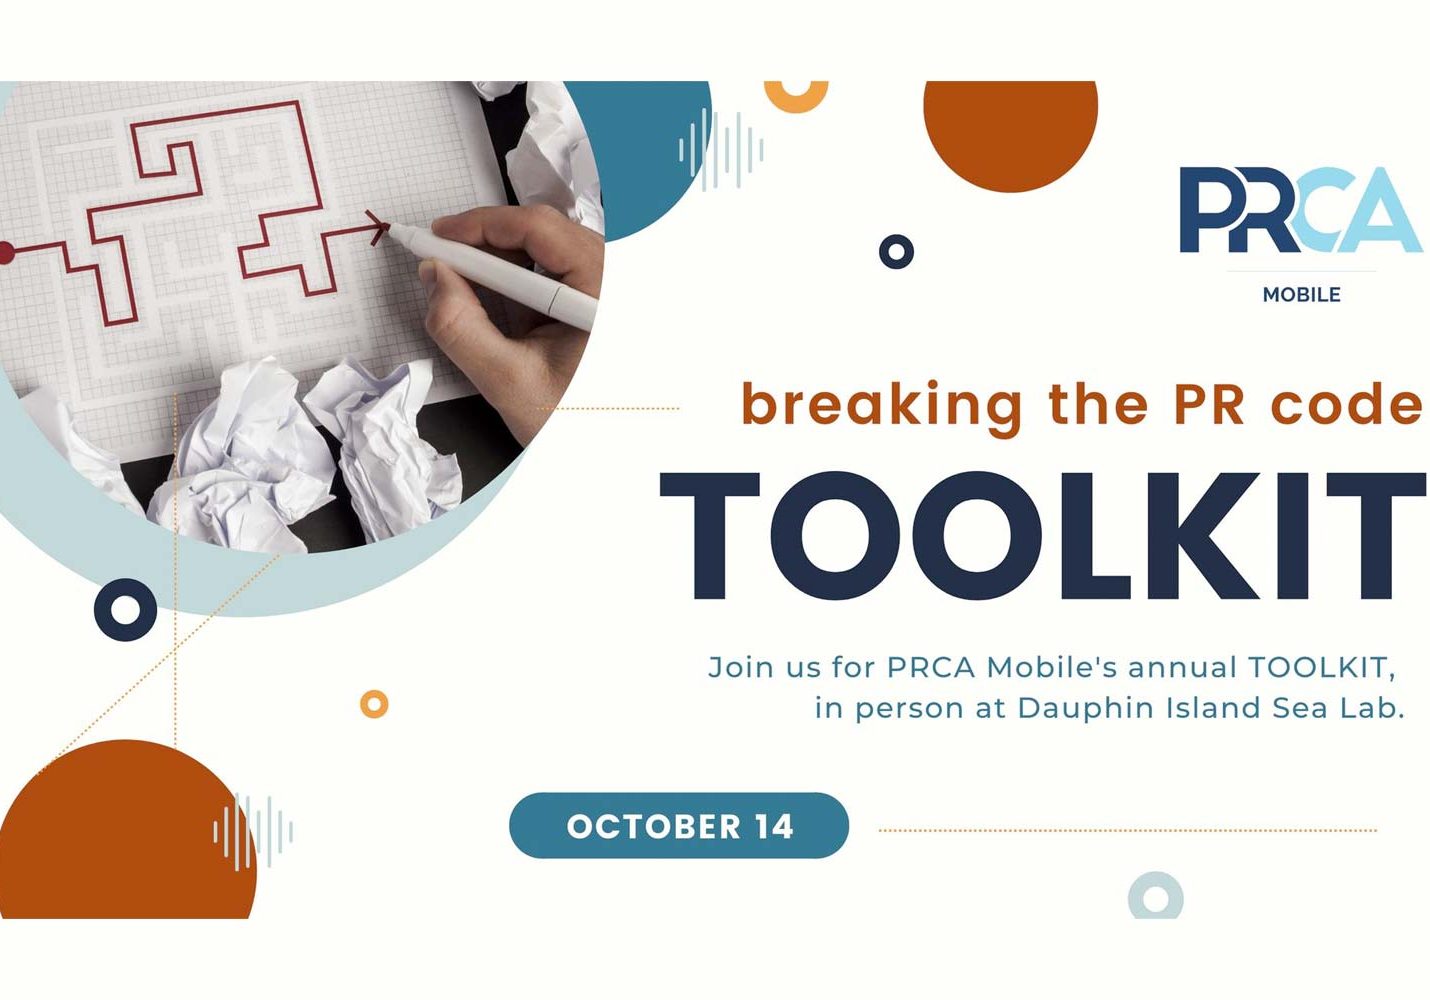 Registration Open For PRCA Toolkit In October